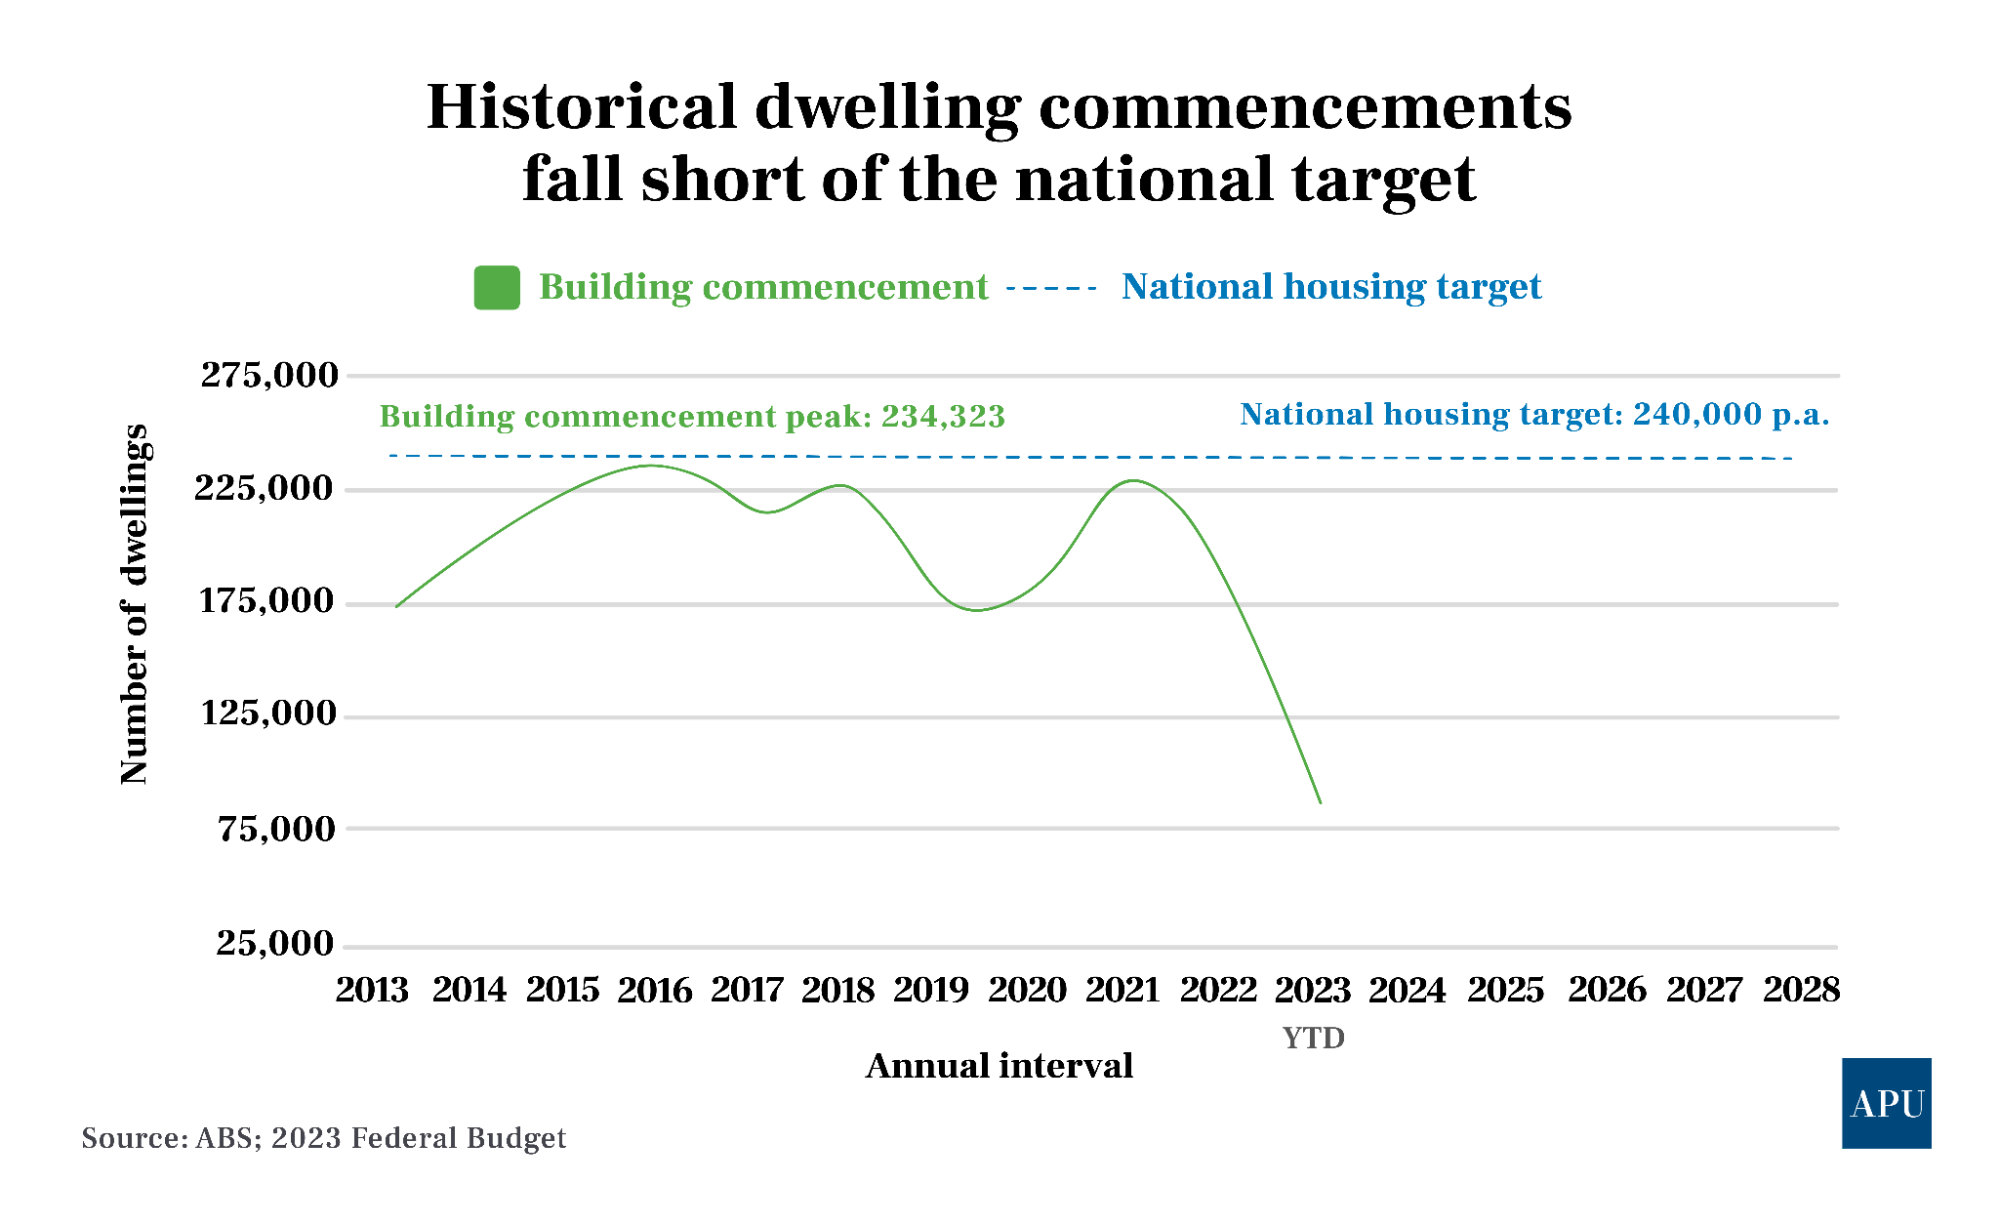 dwelling-commencements-annual-interval